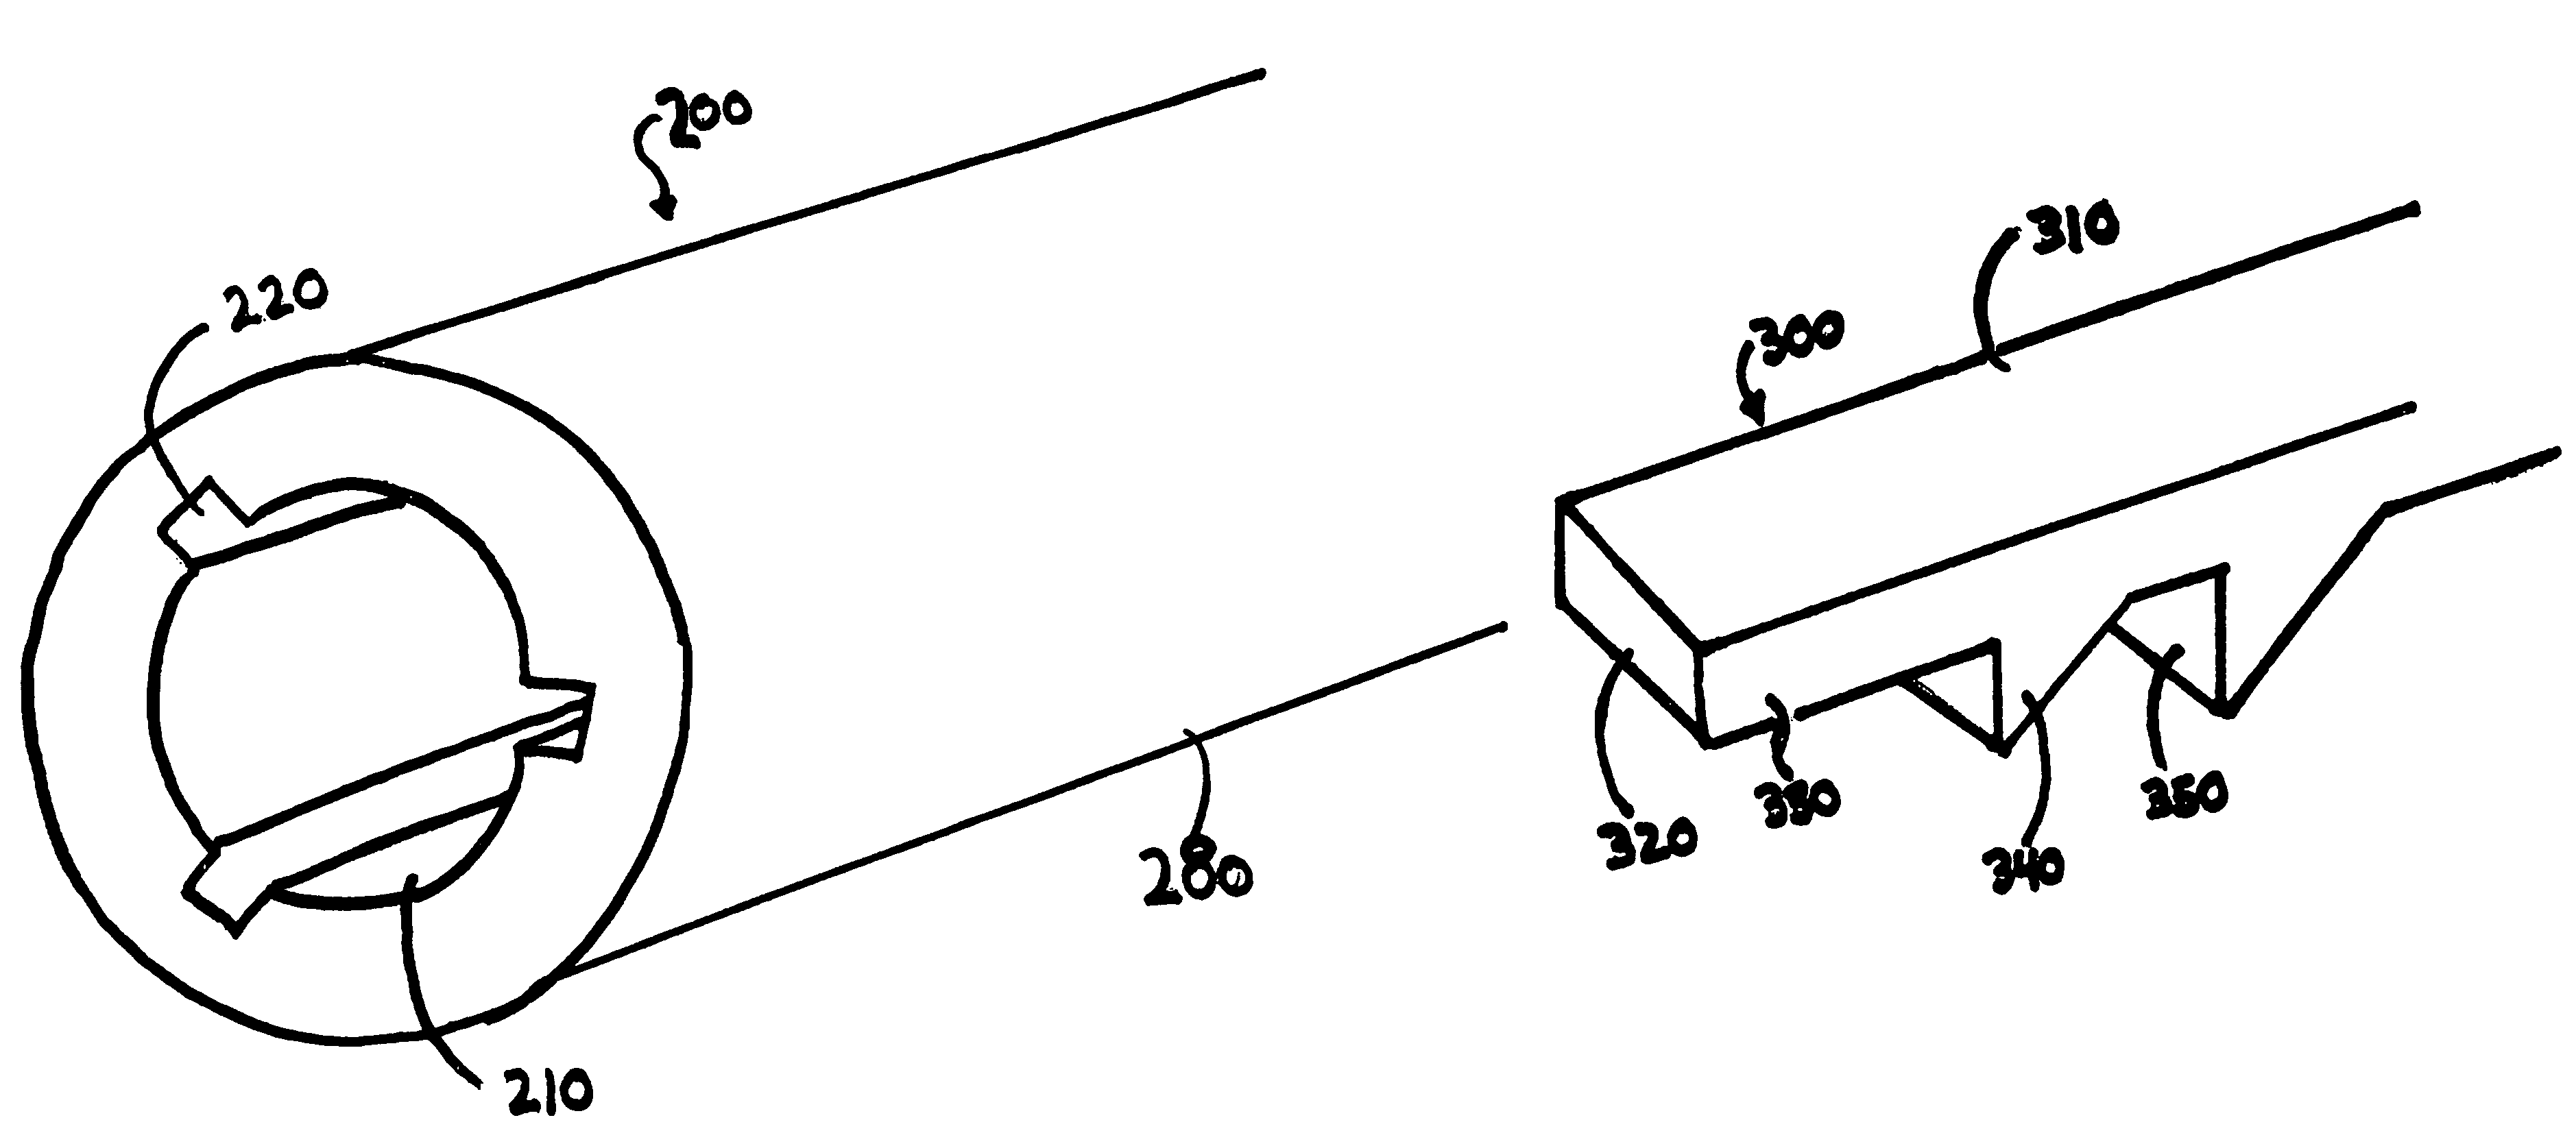 Therapeutic medical appliance delivery and method of use